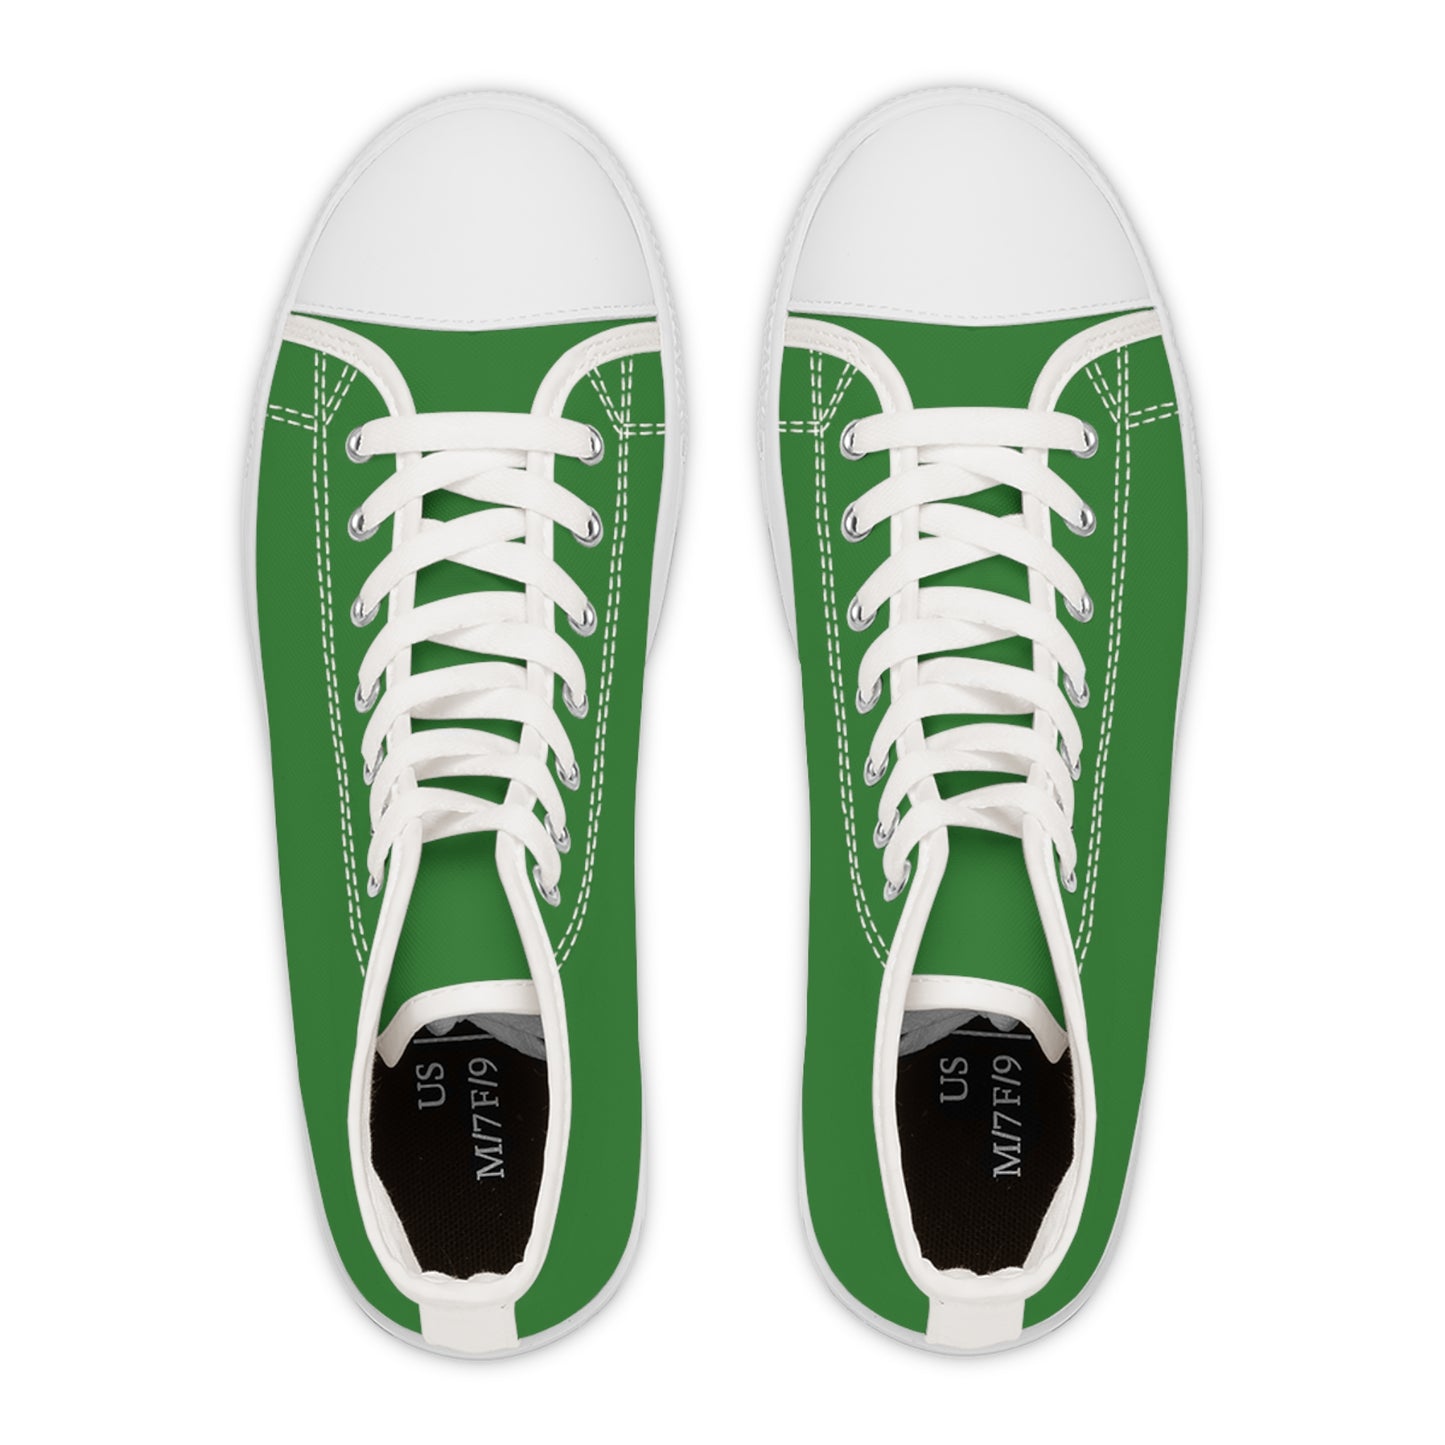 Women's High Top Sneakers - Green US 12 White sole